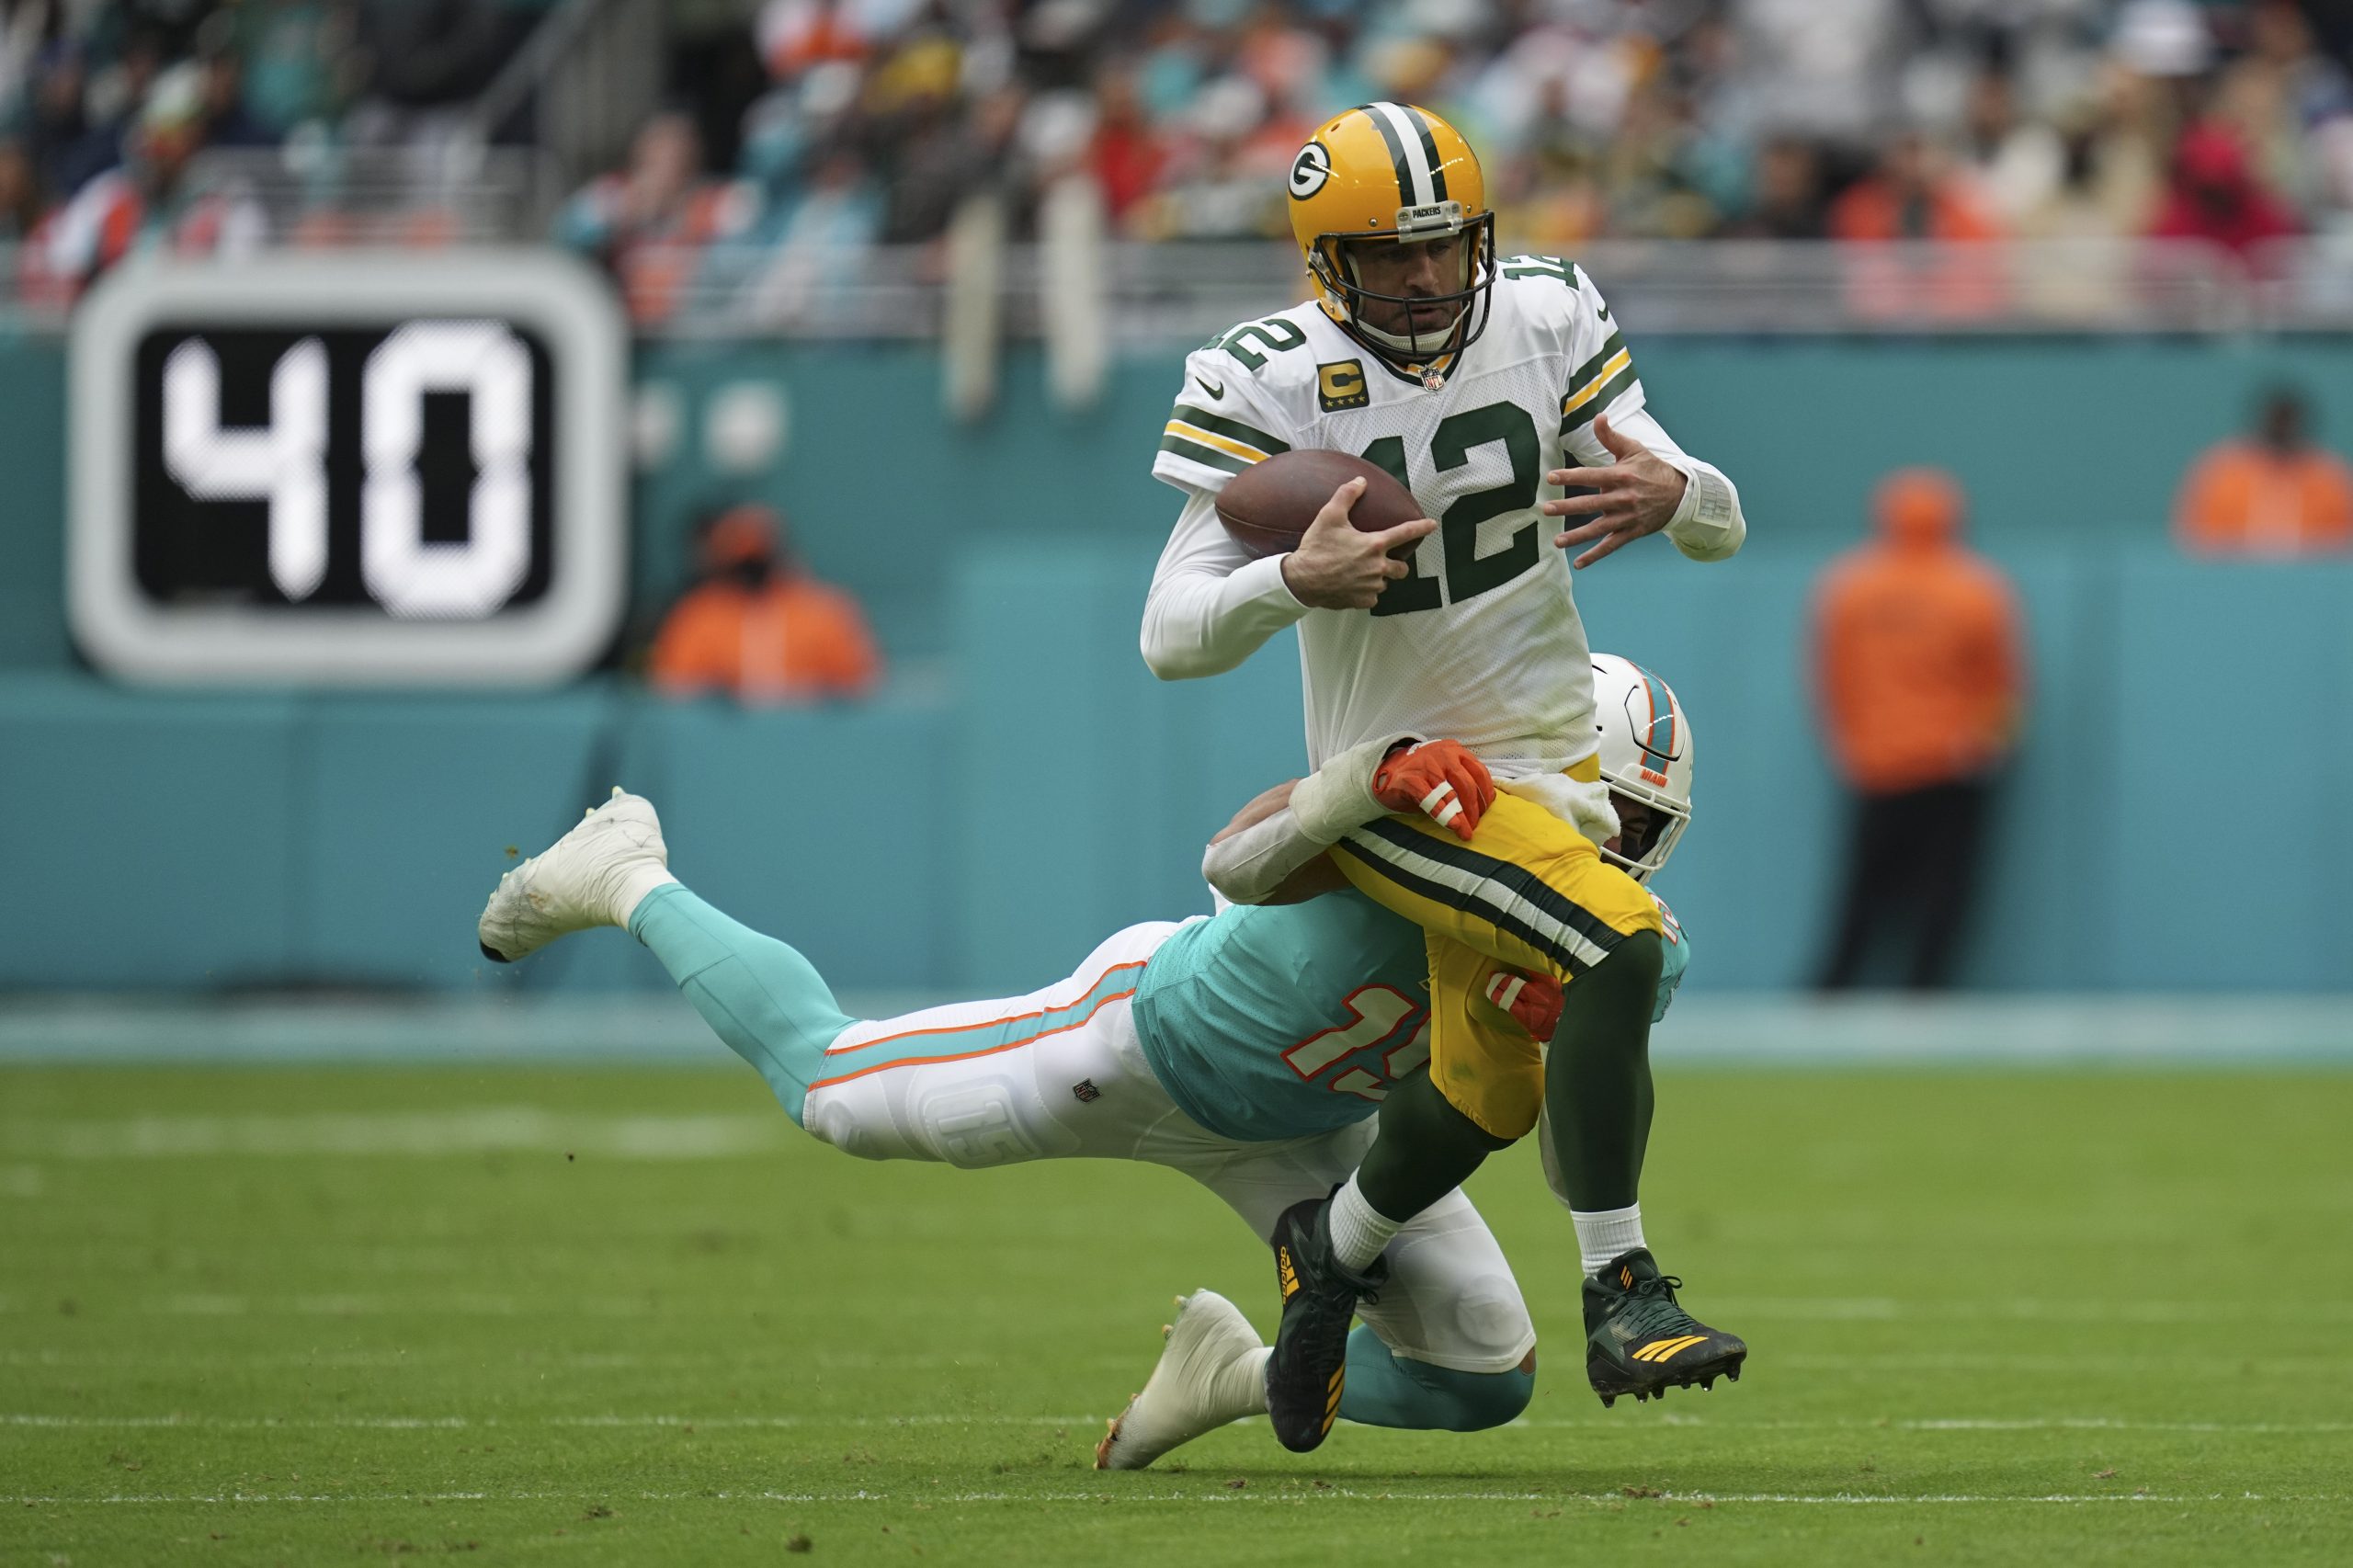 Green Bay Packers quarterback Aaron Rodgers (12) runs through a tackle by Miami Dolphins linebacker Jaelan Phillips (15) as he runs with the ball during the first half of an NFL football game, Sunday, Dec. 25, 2022, in Miami Gardens, Fla. (AP Photo/Jim Rassol)